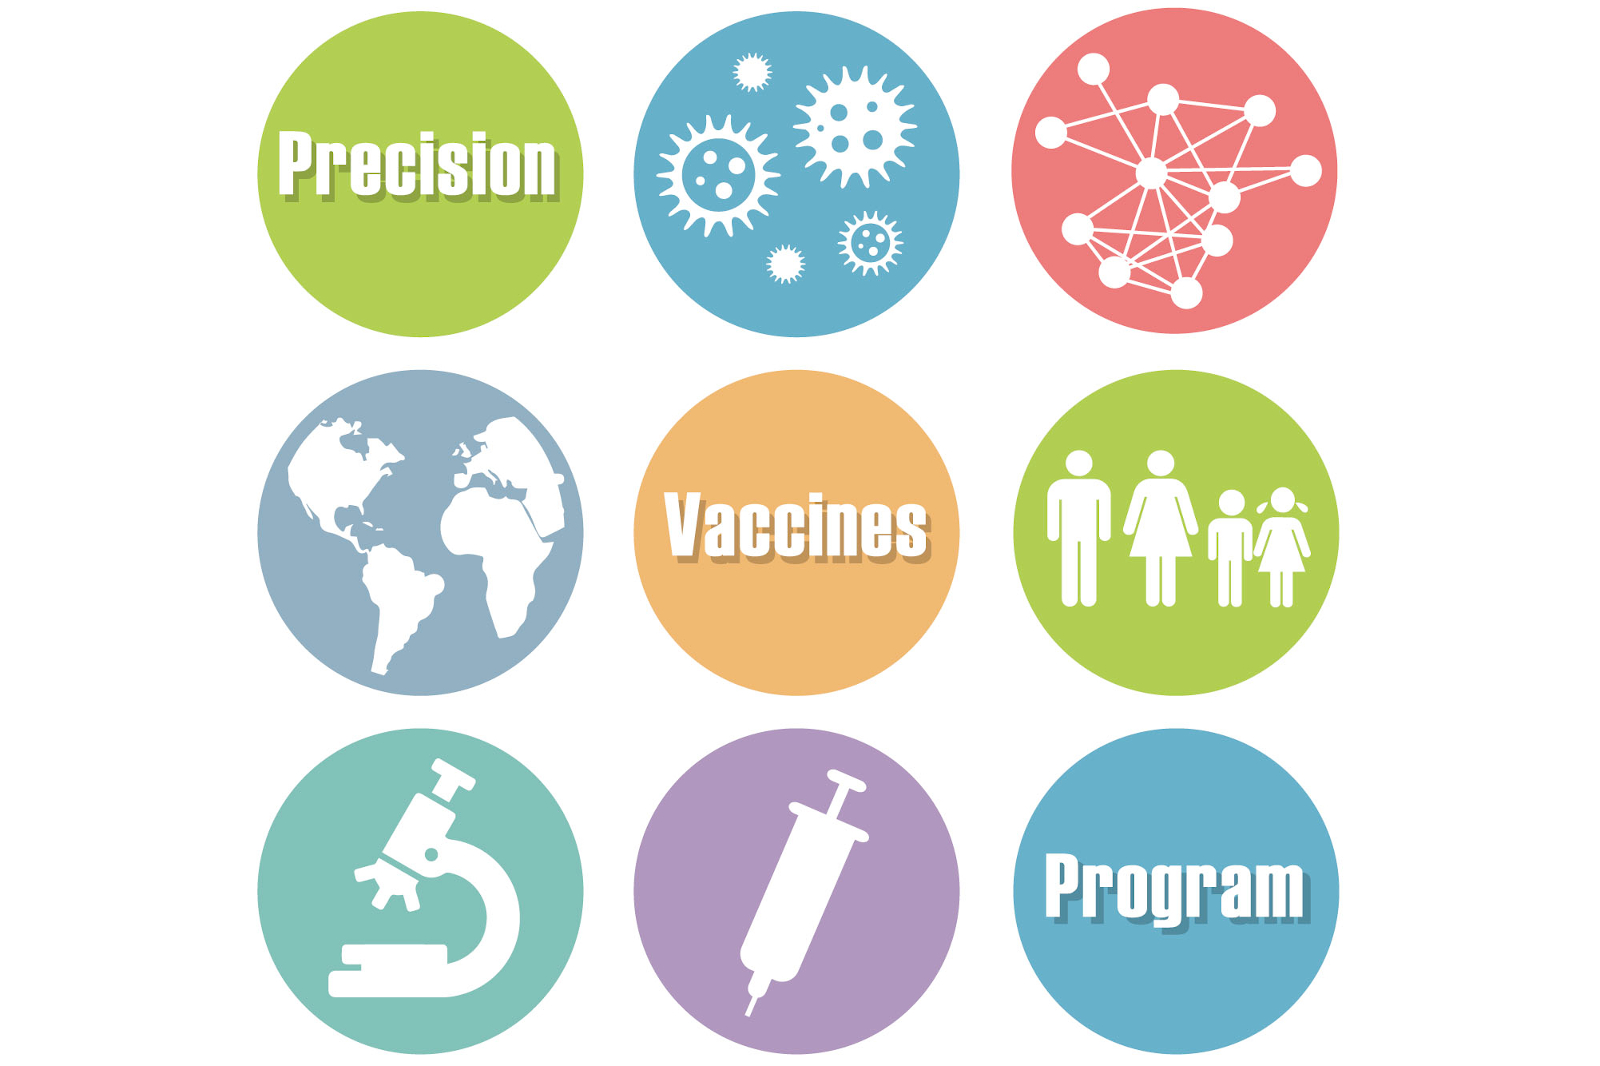 Here you will learn about Boston Children Hospital's Precision Vaccines Program.